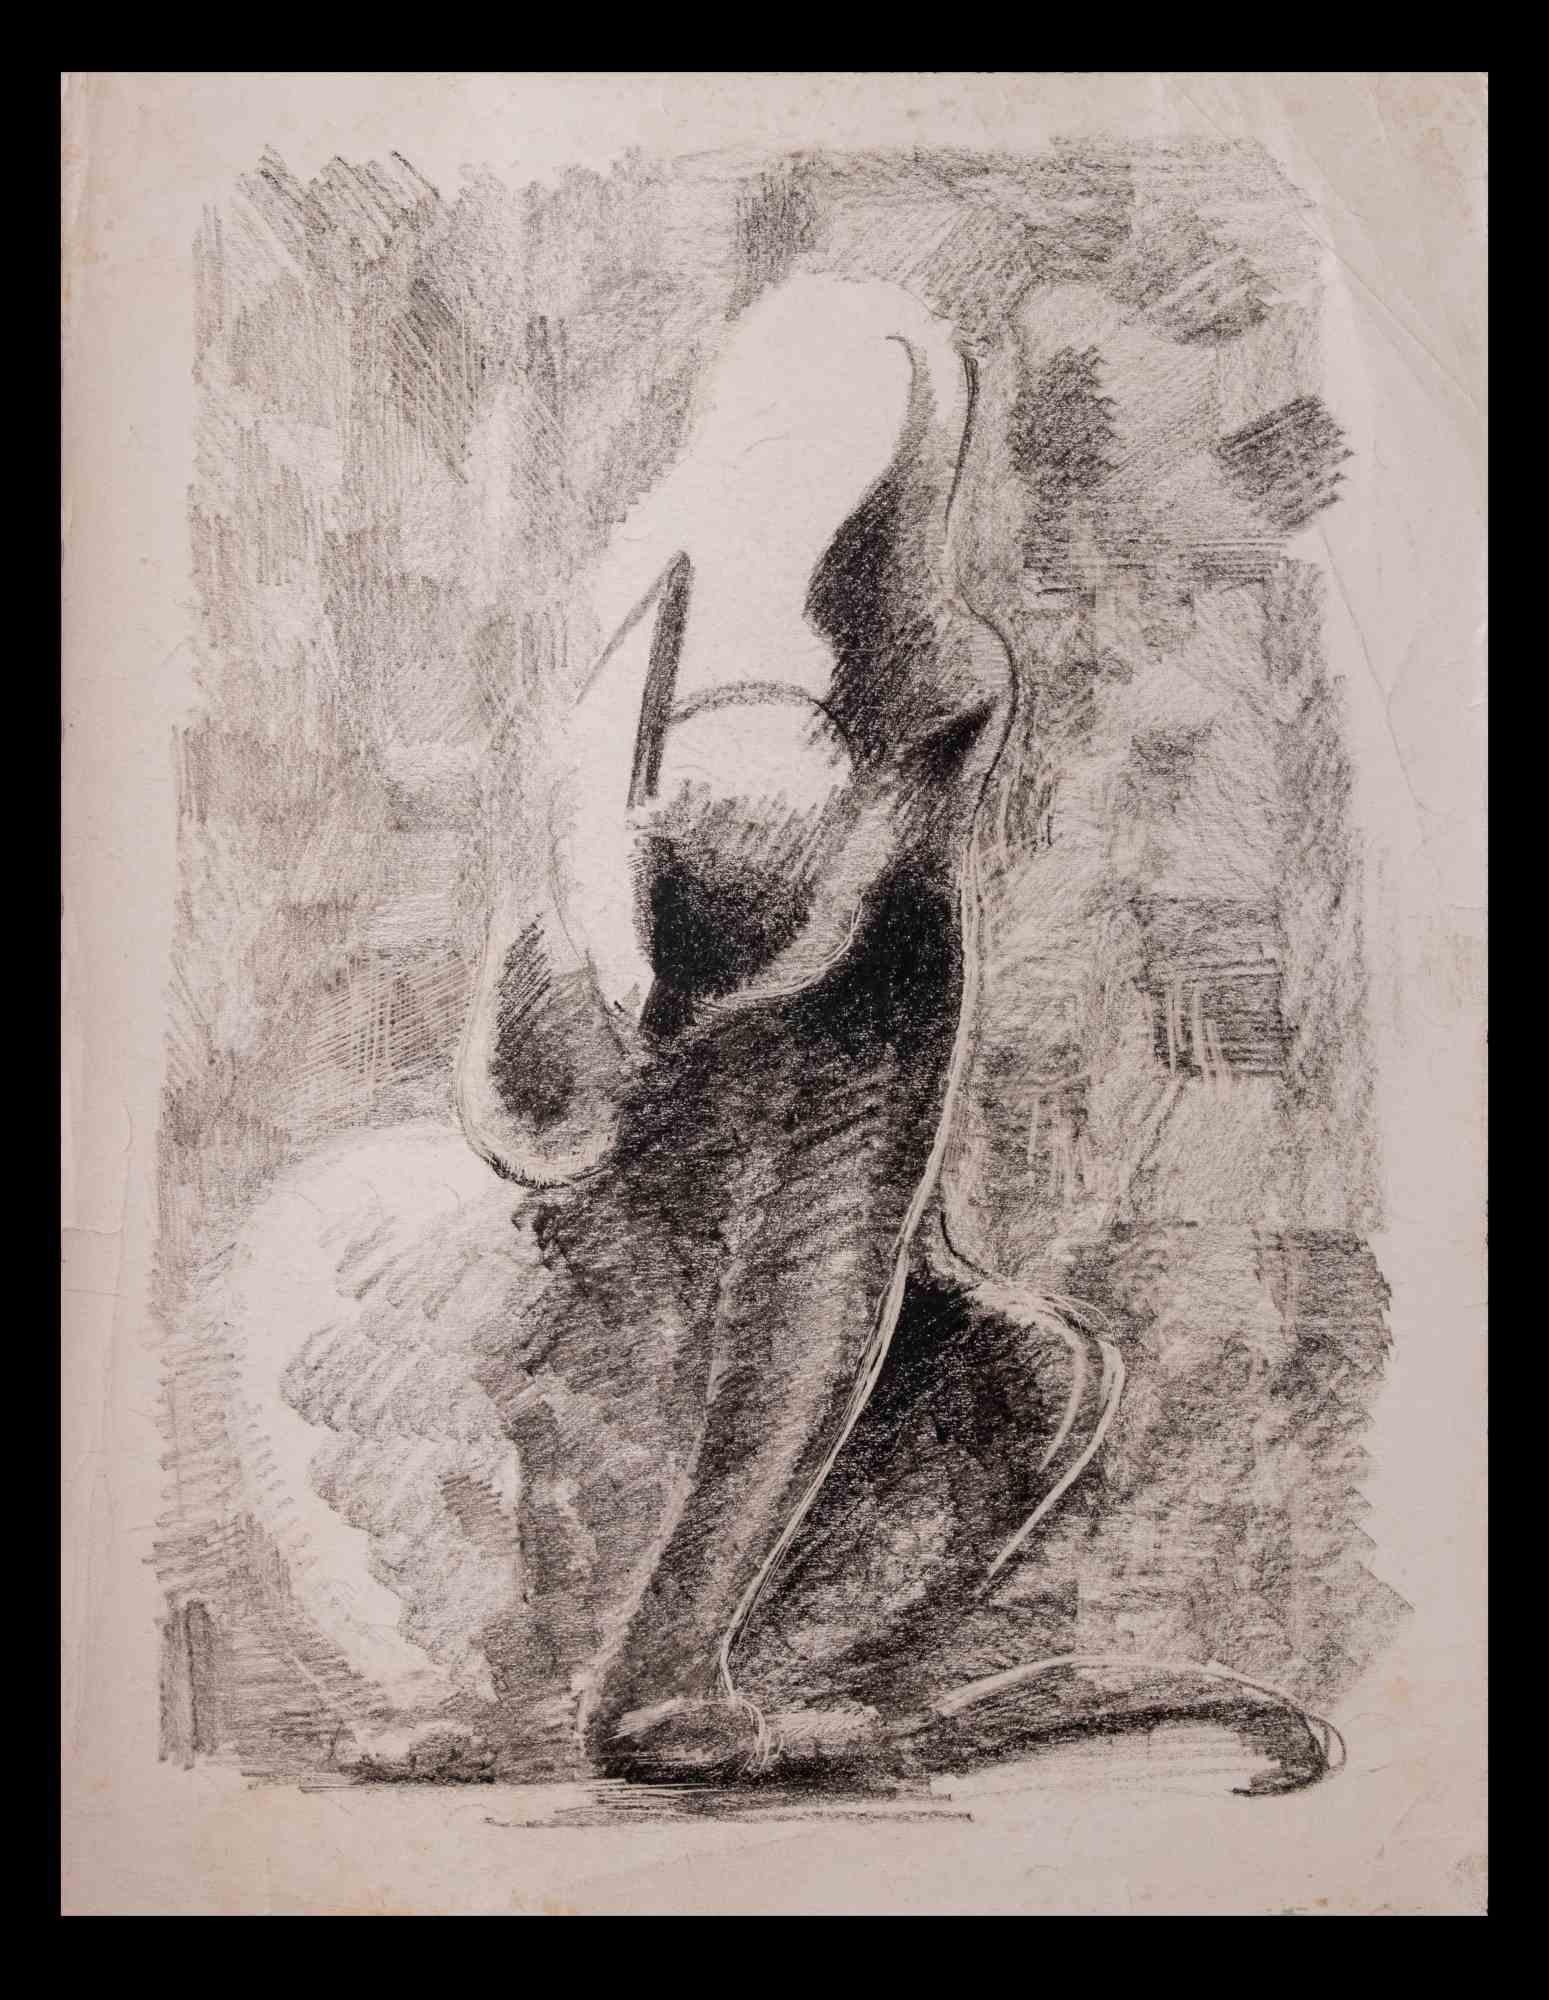 Cat is a charcoal drawing realized by Giselle Halff (1899-1971).

Good conditions.

Giselle Halff (1899-1971) born in Hanoi, student of R.X. Prinet, R. Ménard, L. Simon, B. Boutet de Monvel. Animal painter and draughtsman.